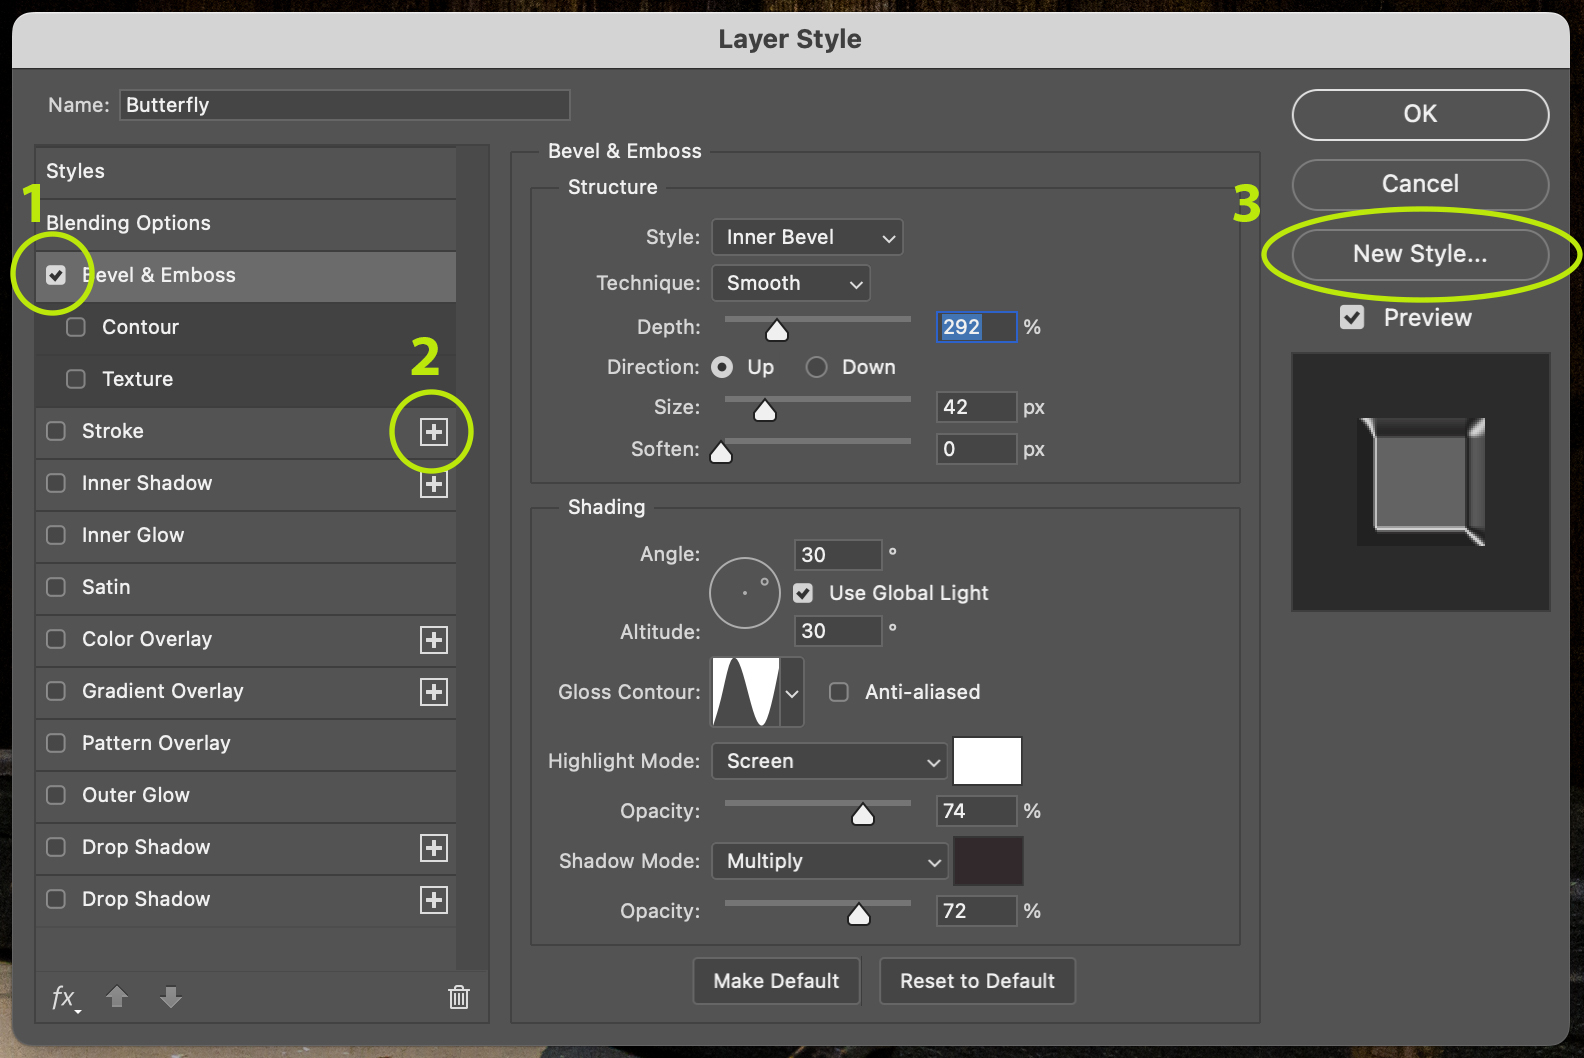 The Layer Style dialog box and options for the Bevel & Emboss effect.